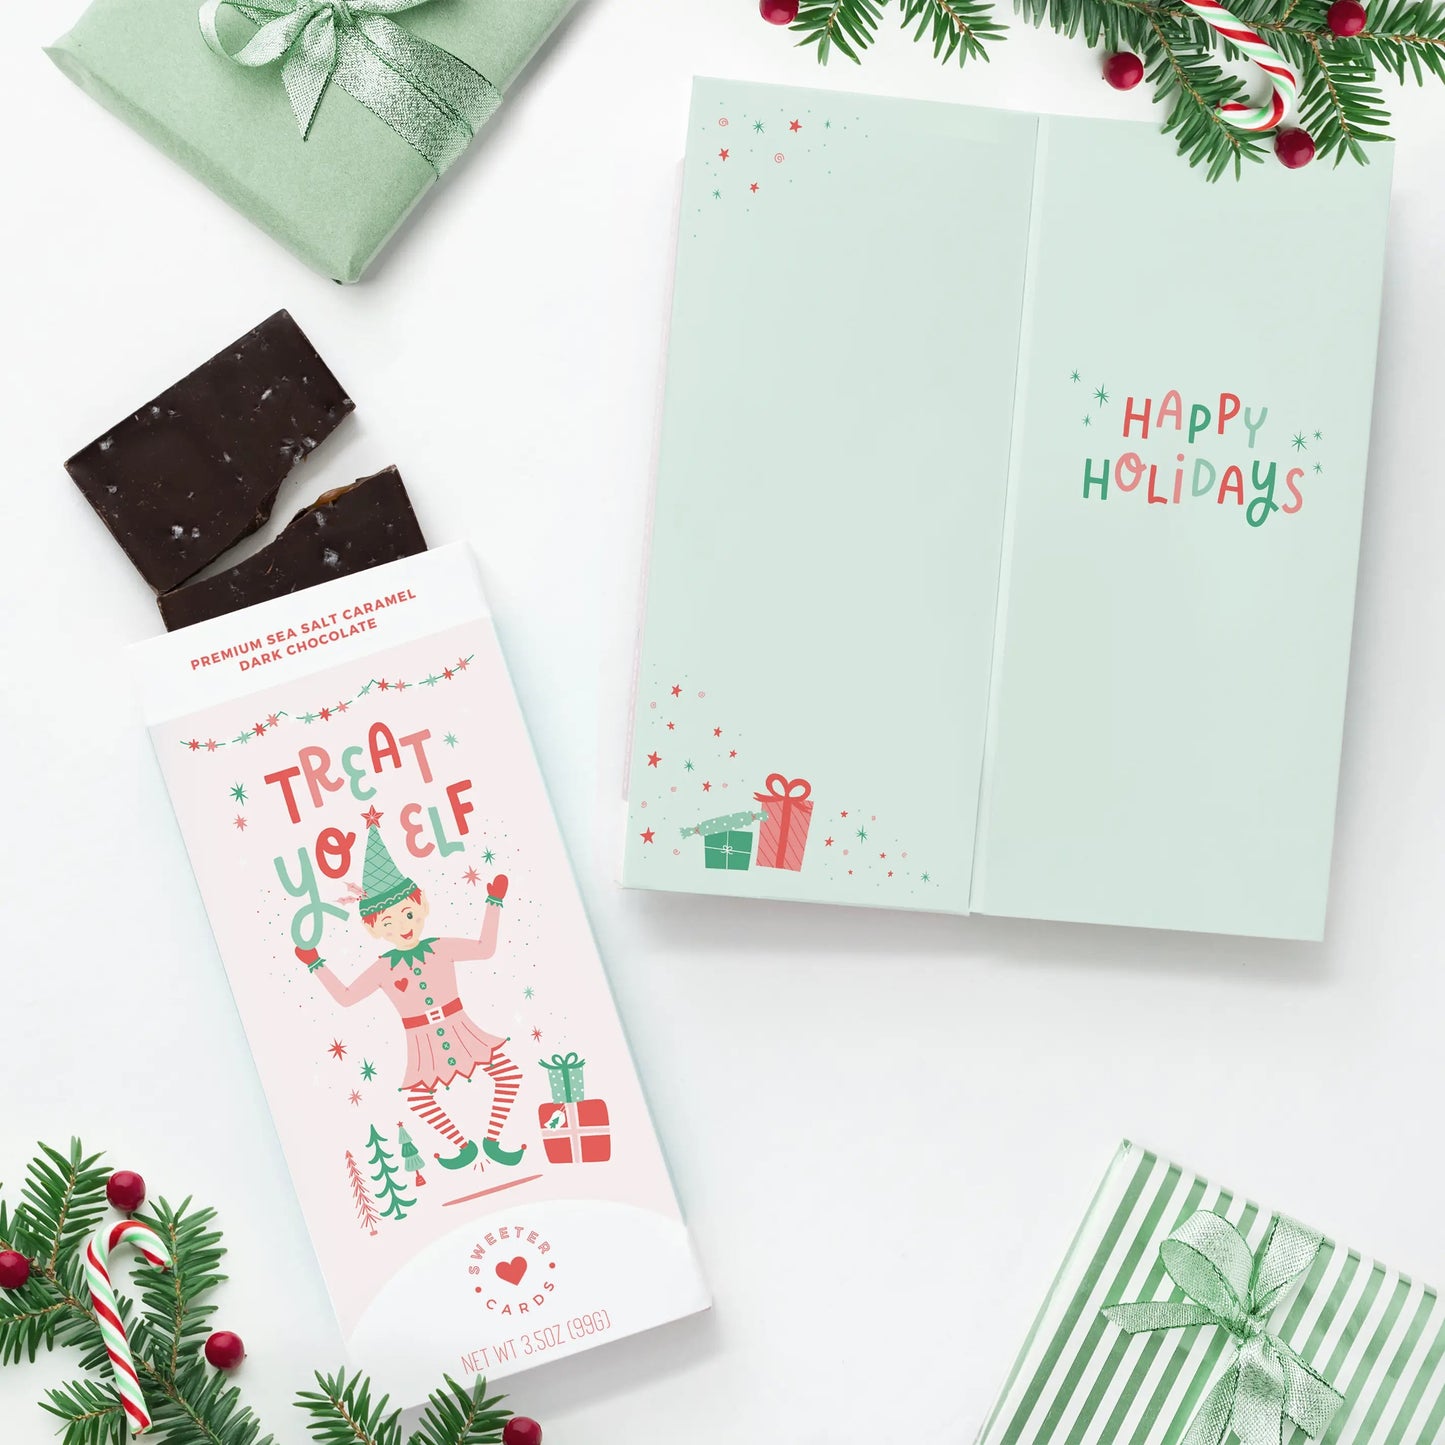 Chocolate Bar + Card - Multiple Variations Available